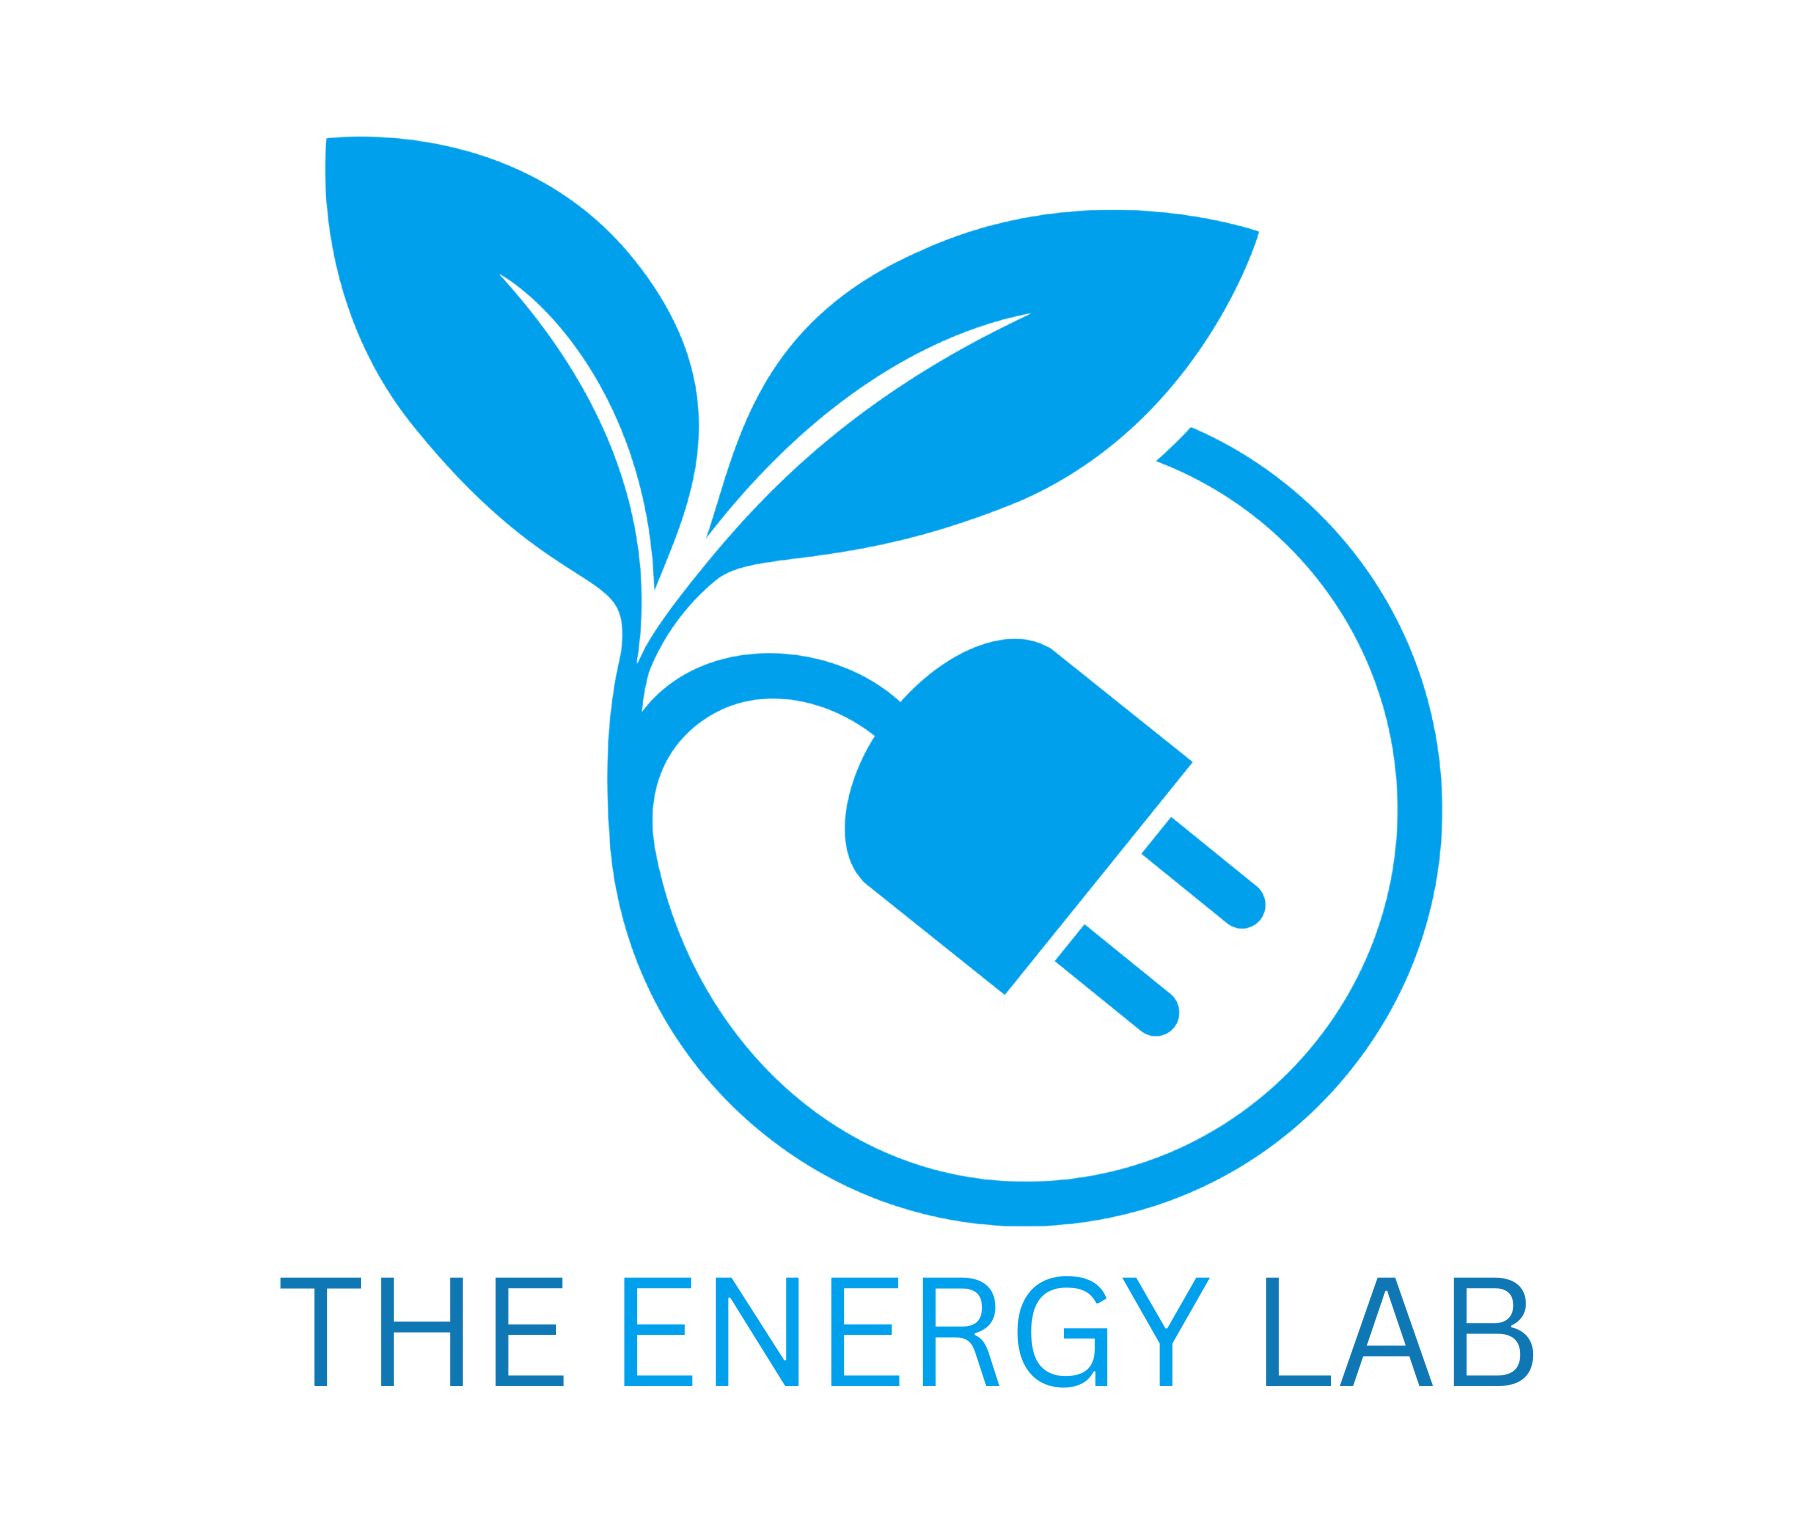 The Energy Lab on wiSource.com